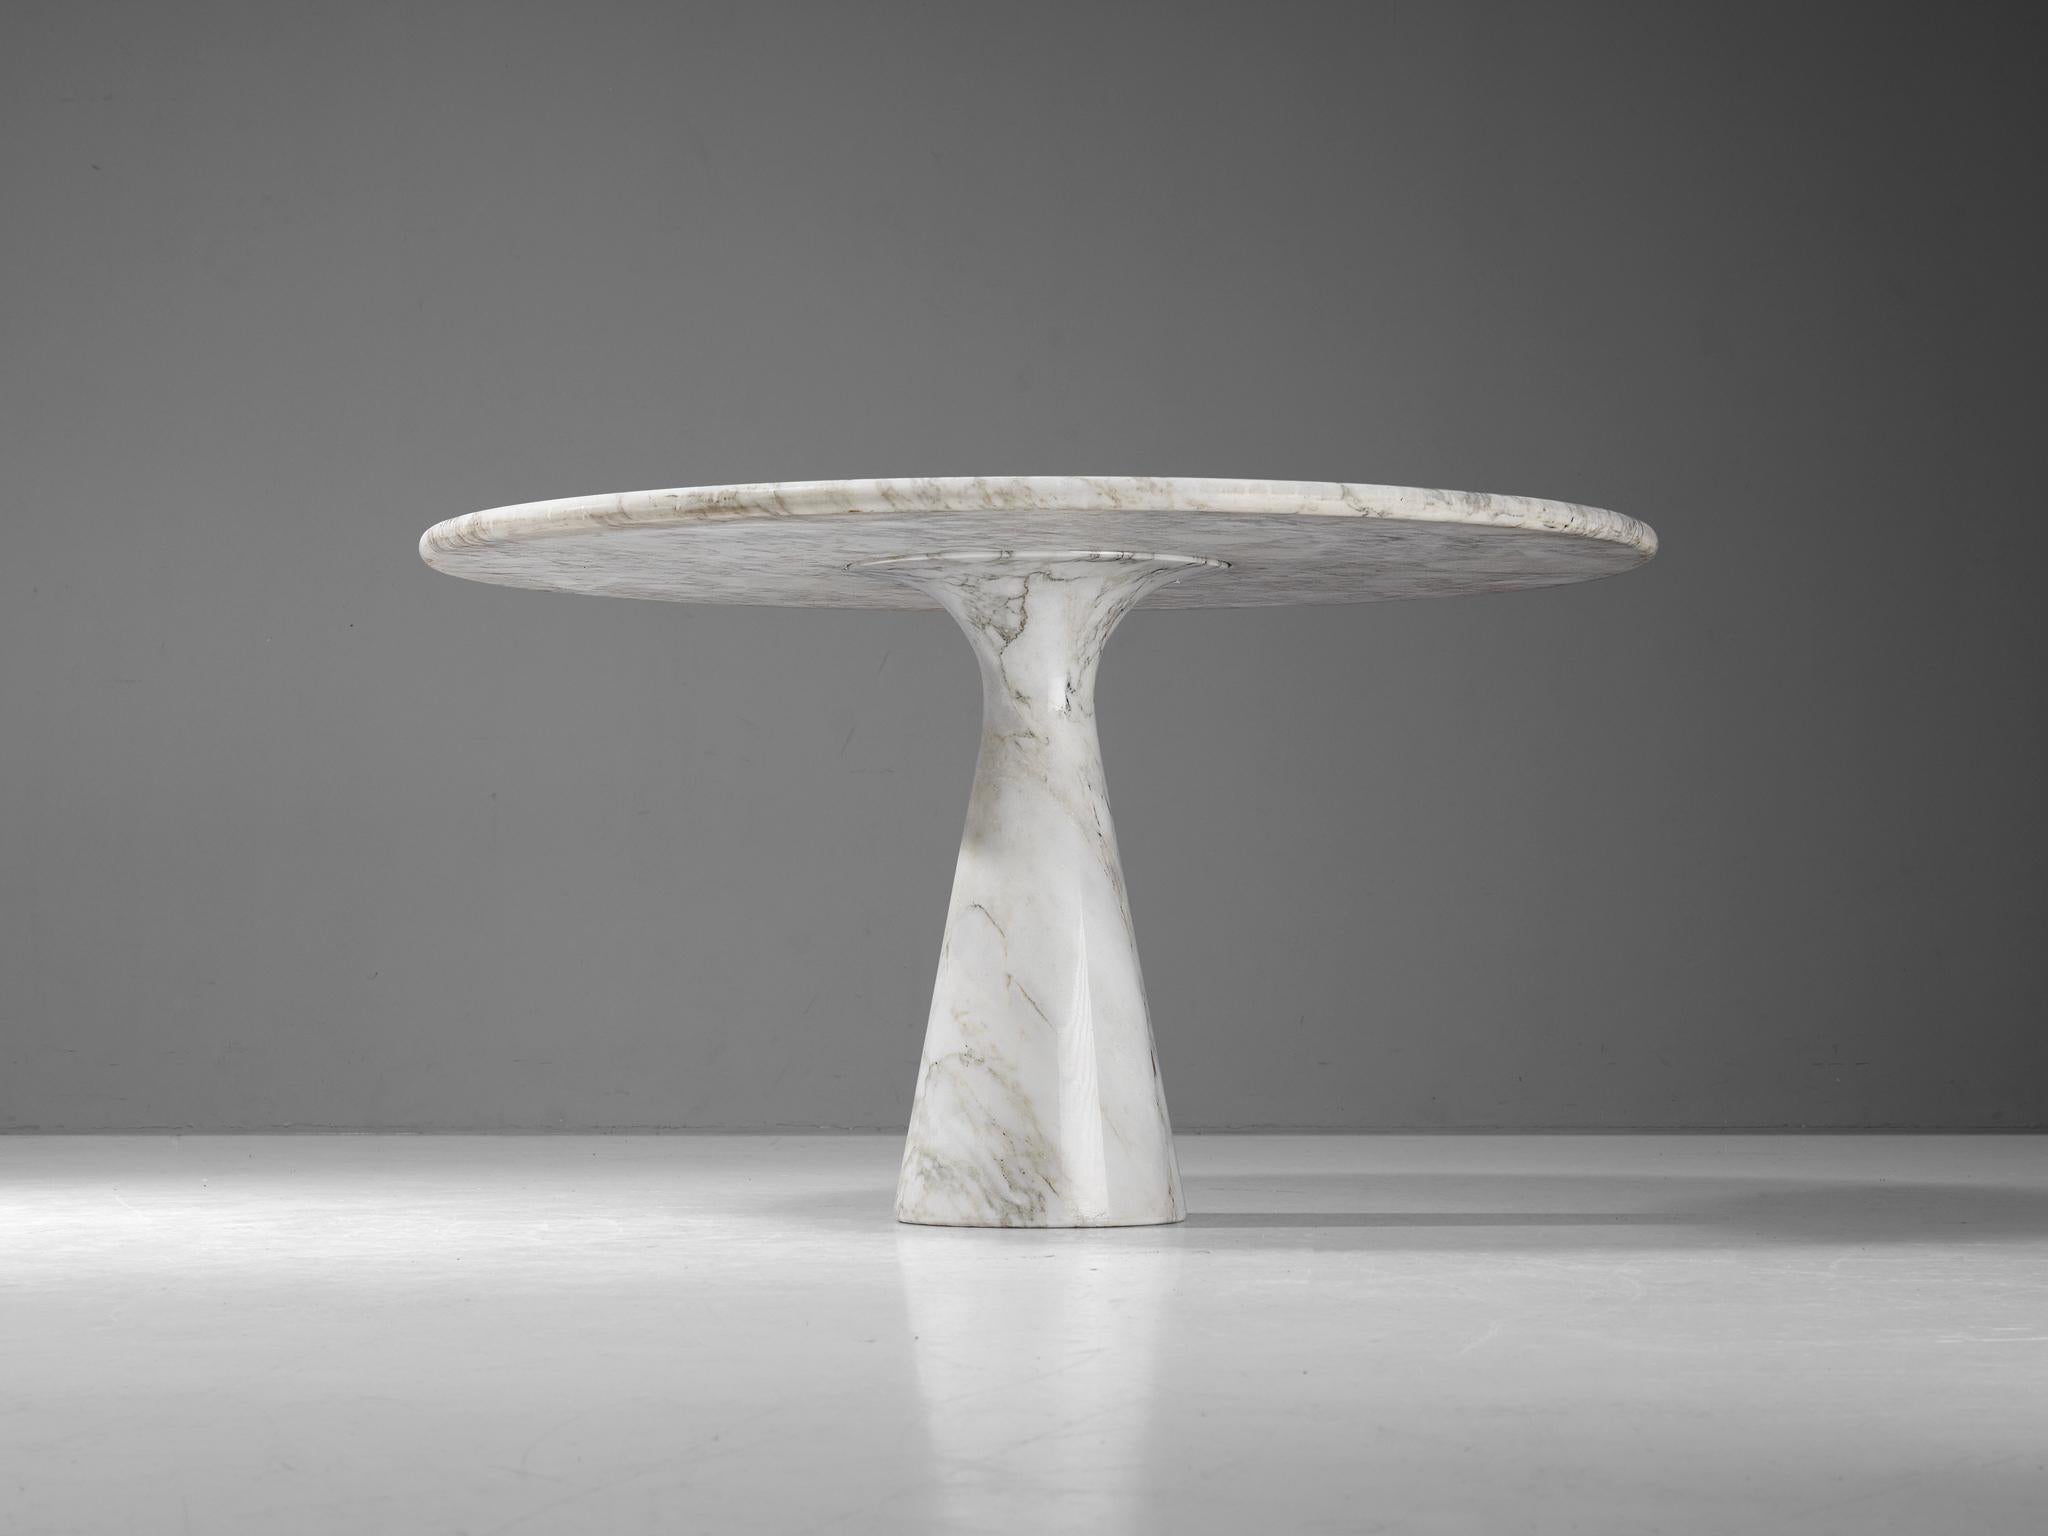 Angelo Mangiarotti for Skipper, dining table ‘M1’, Carrara marble, 1969

This sculptural table by Angelo Mangiarotti is a skilful example of postmodern design. The strikingly patterned white to grey table has a cone-shaped pedestal and a circular